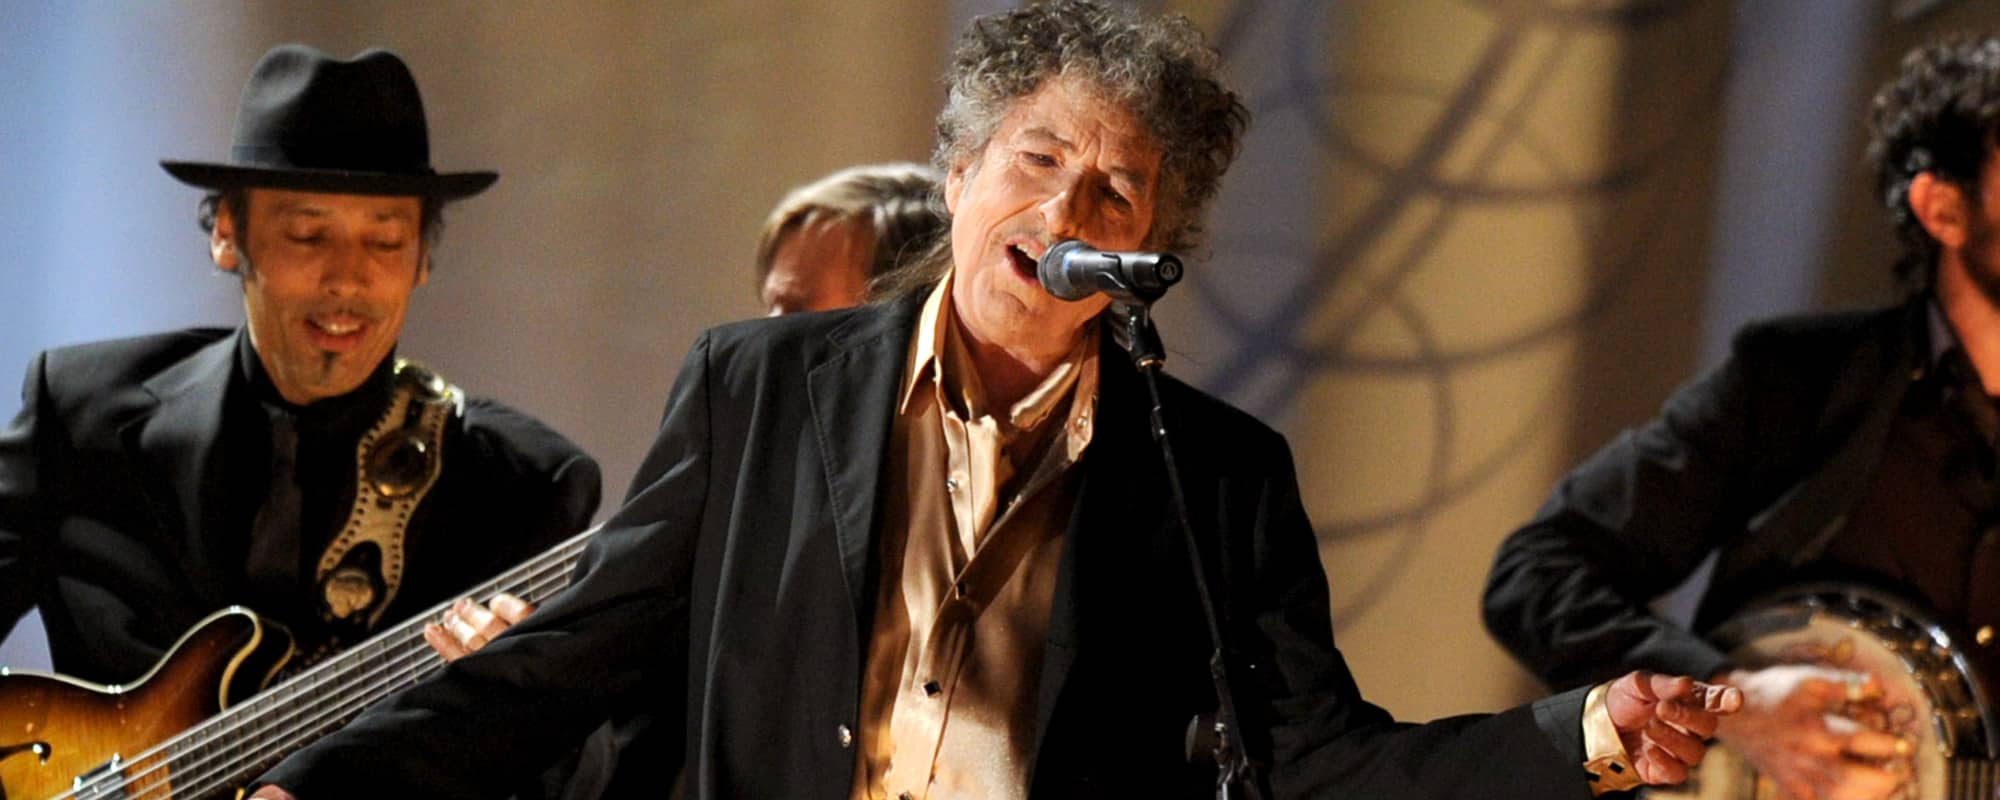 Universal Music Acquires Entire Bob Dylan Song Catalog